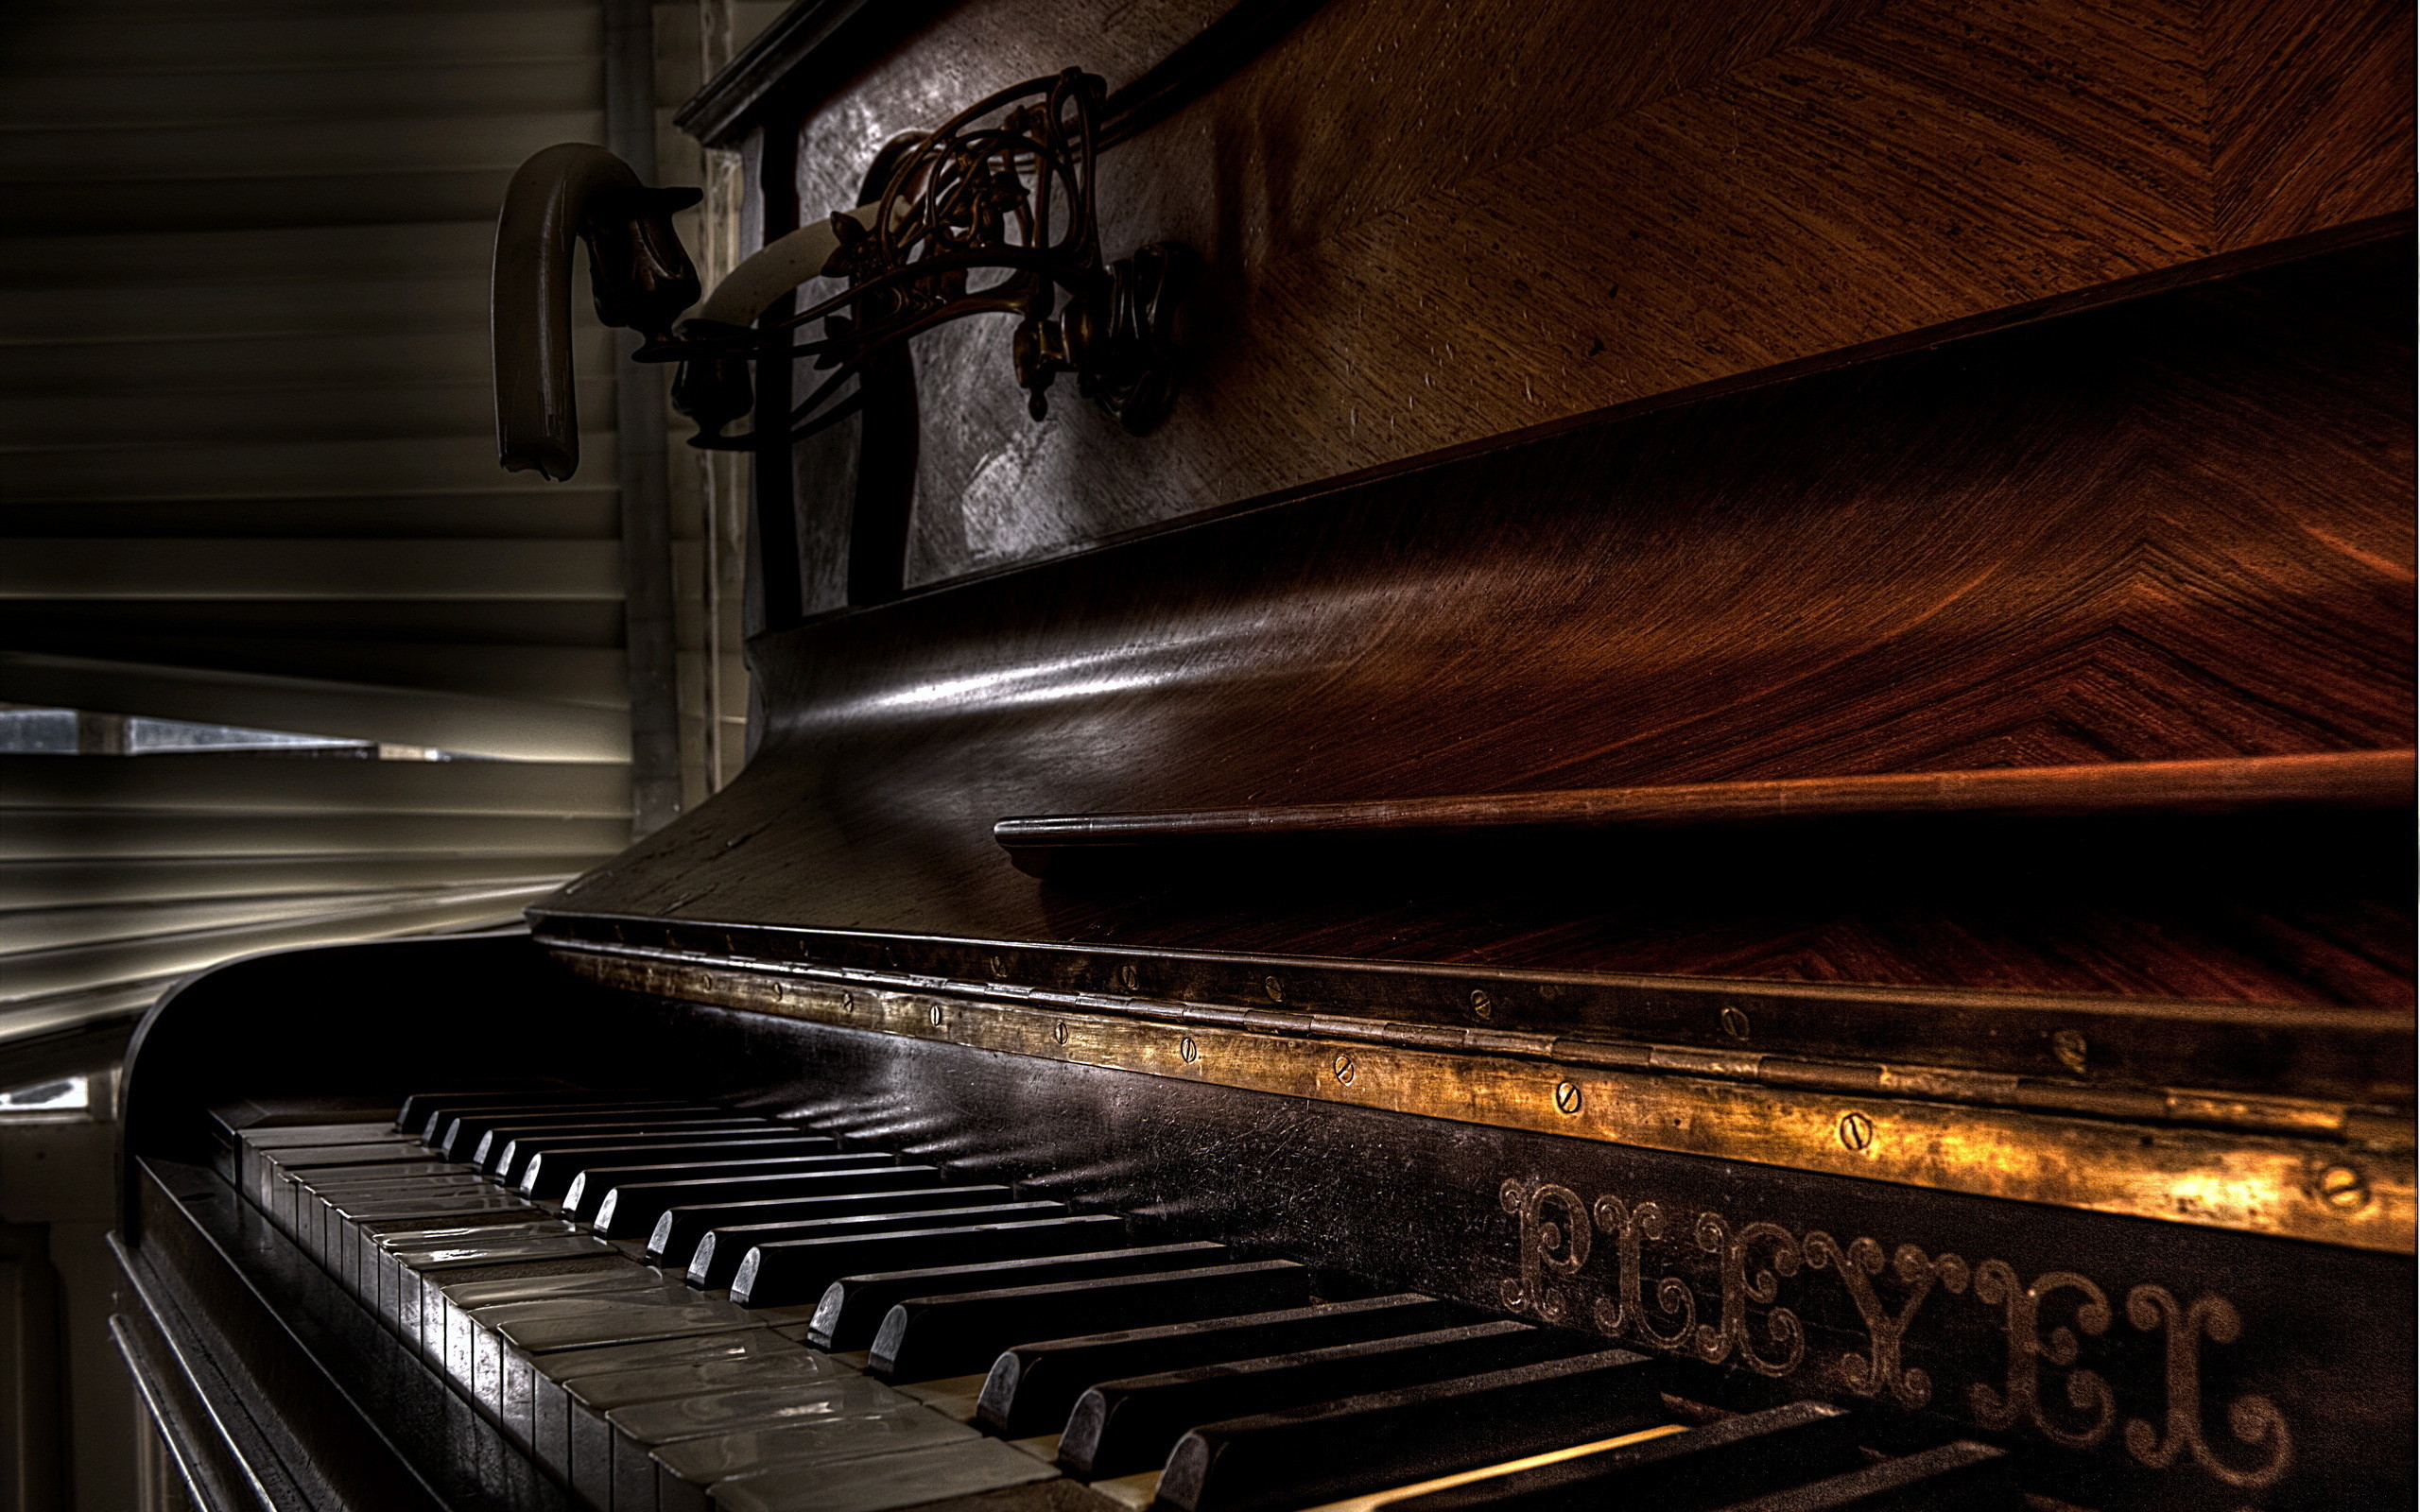 2560x1600 Piano Pictures HD Free Download Piano Images Wallpapers